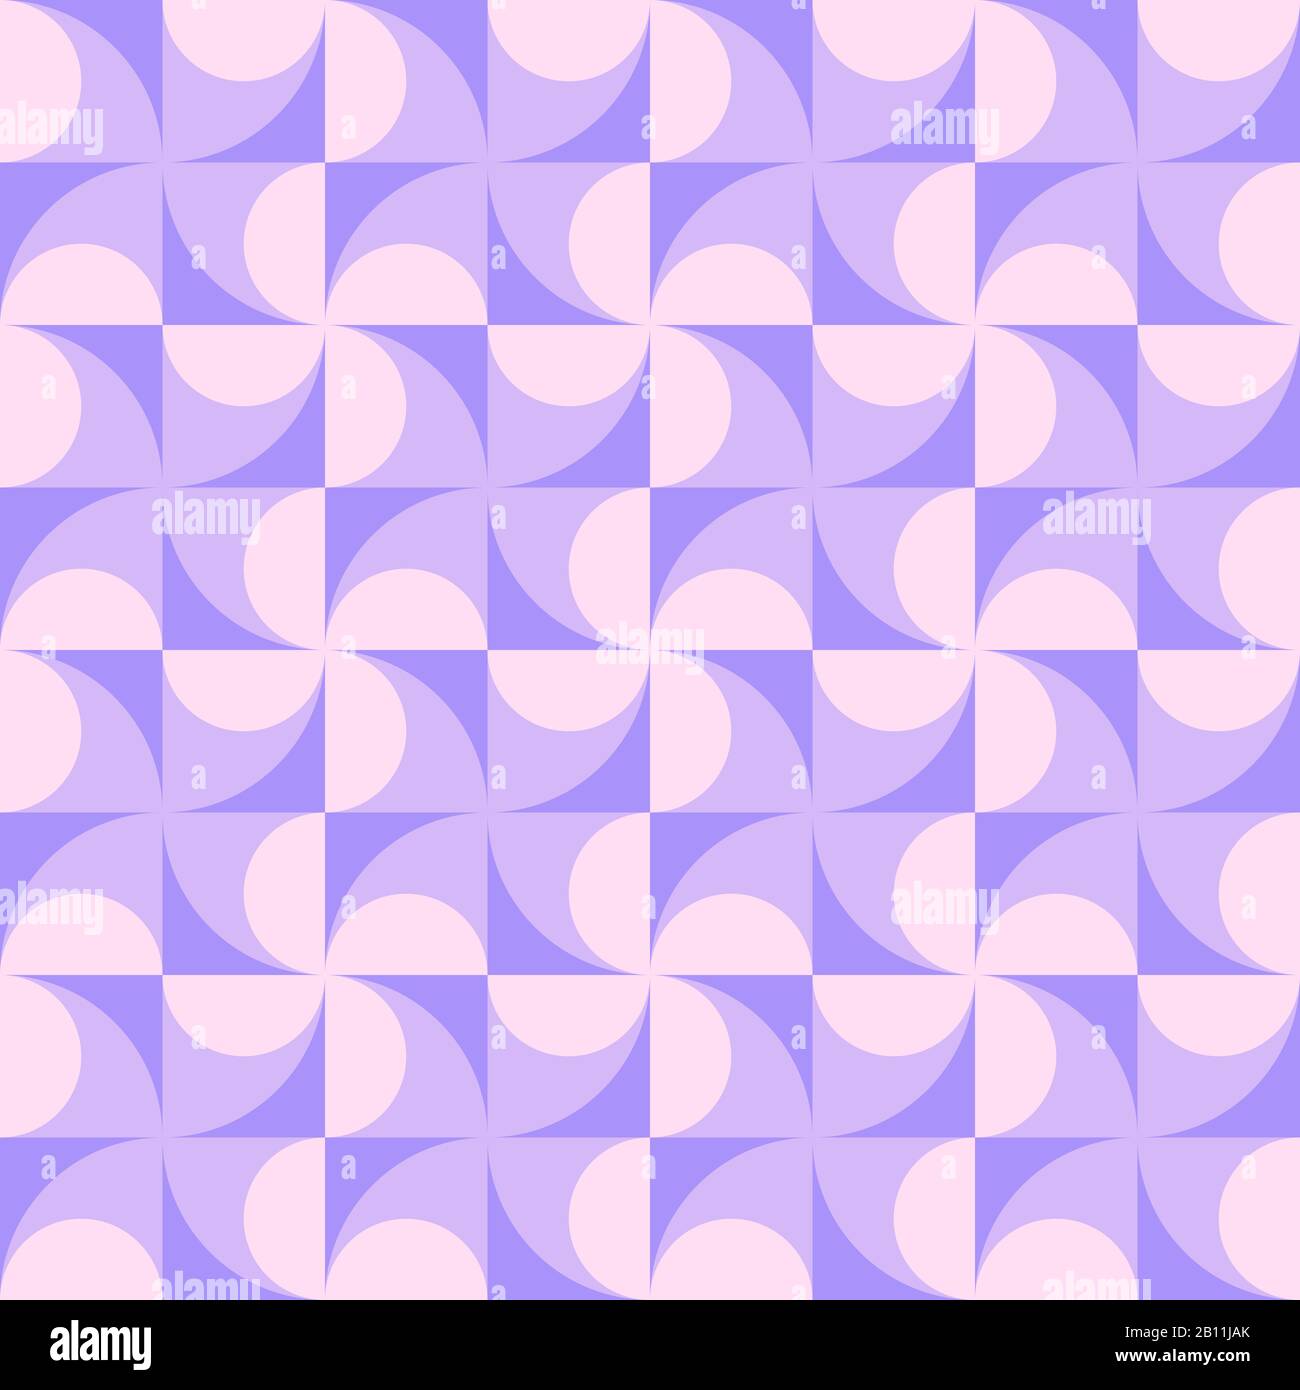 Abstract geometric design. Timeless seamless pattern for textile, wallpaper, wrapping paper, prints, surface design, inlay, parquet, web background or Stock Vector